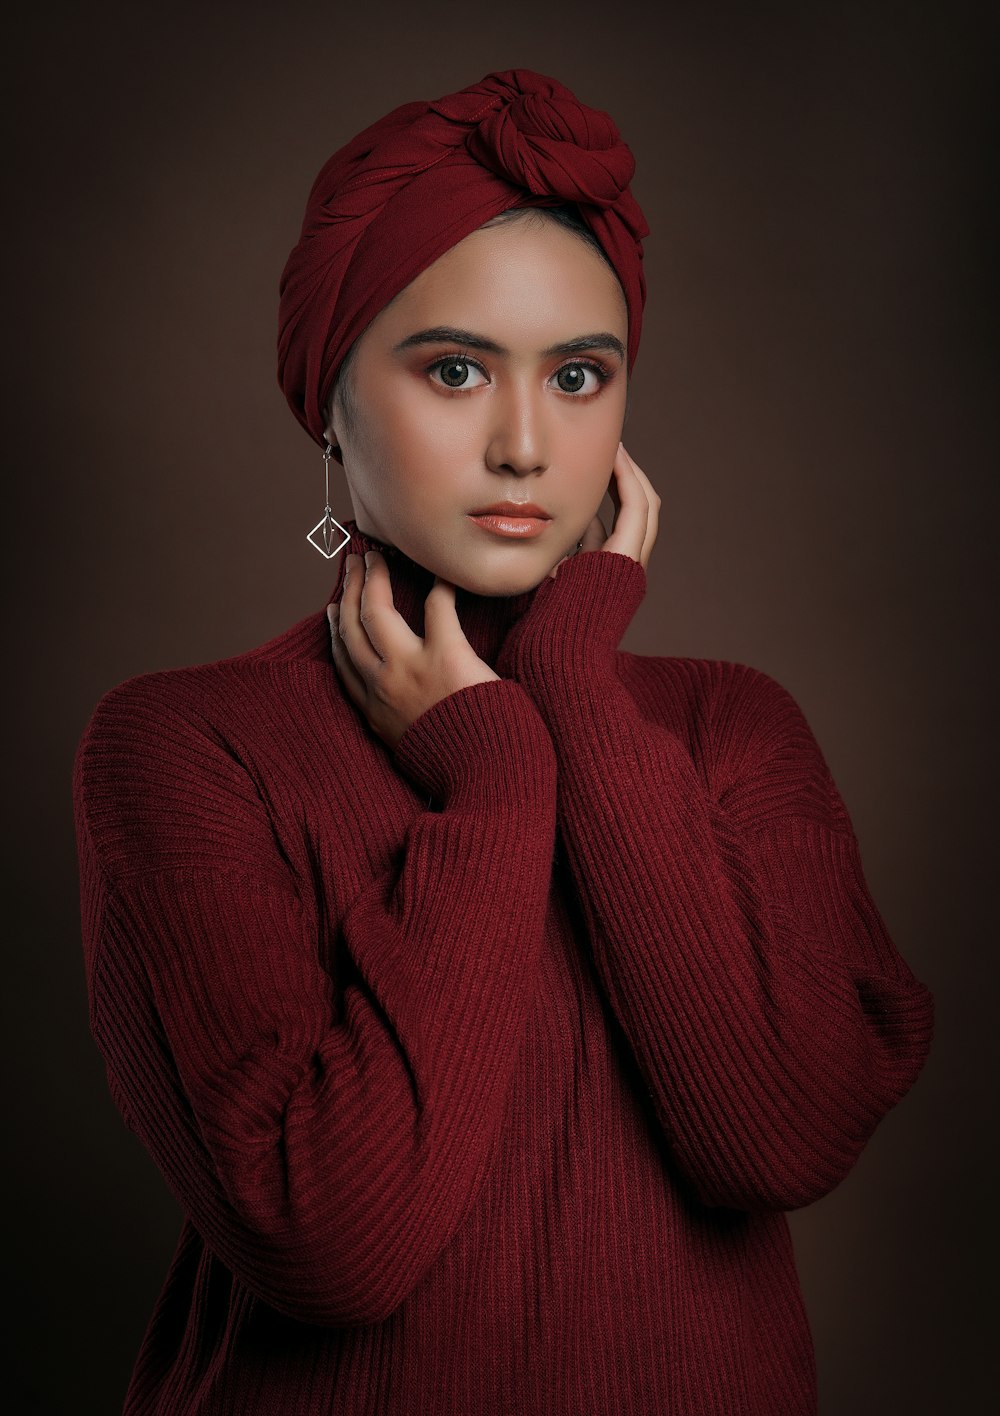 a woman wearing a red sweater and a turban